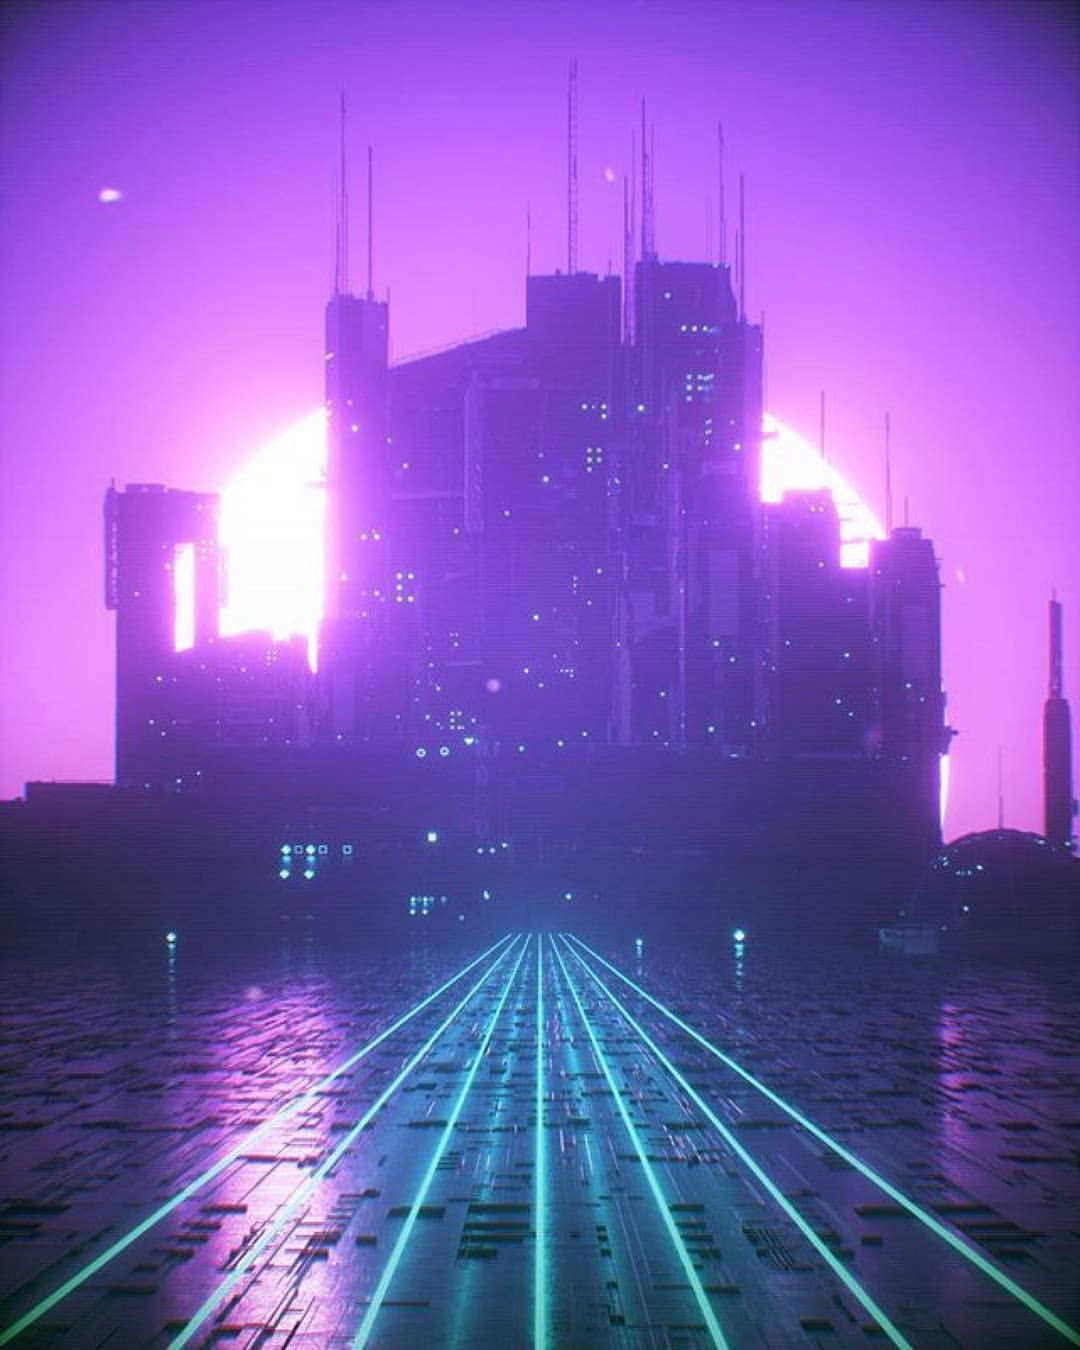 Photo by 『間の楔』ってしっているか? with the username @KaiKold,  August 21, 2017 at 2:53 PM and the text says 'retrowave-vr:

Artist: @rabbit.hole_renders
Title: Gateway
Visit this artist profile for more amazing work!
.
///////////////////////////////////////////////////////////////////////
.
By using the hashtag #retrowavevr your design would be featured on..'